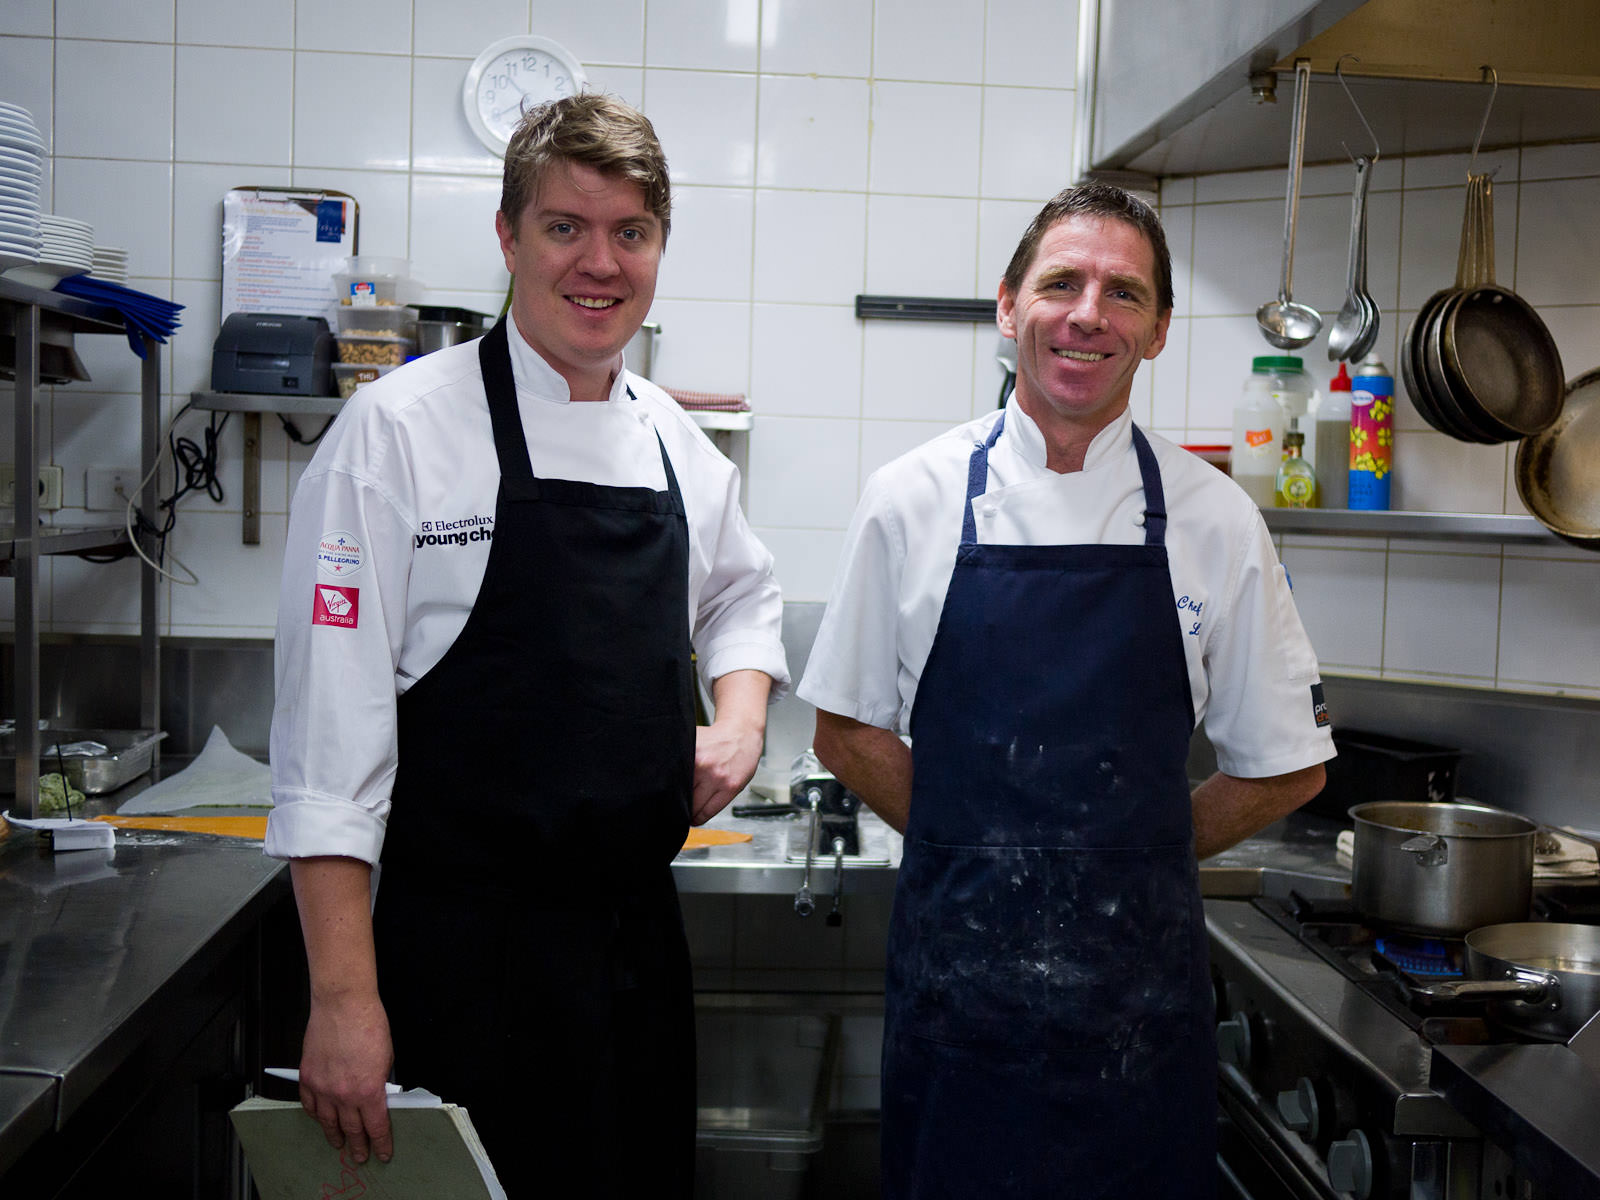 Chefs Richard Ousby and Colin Lyttle